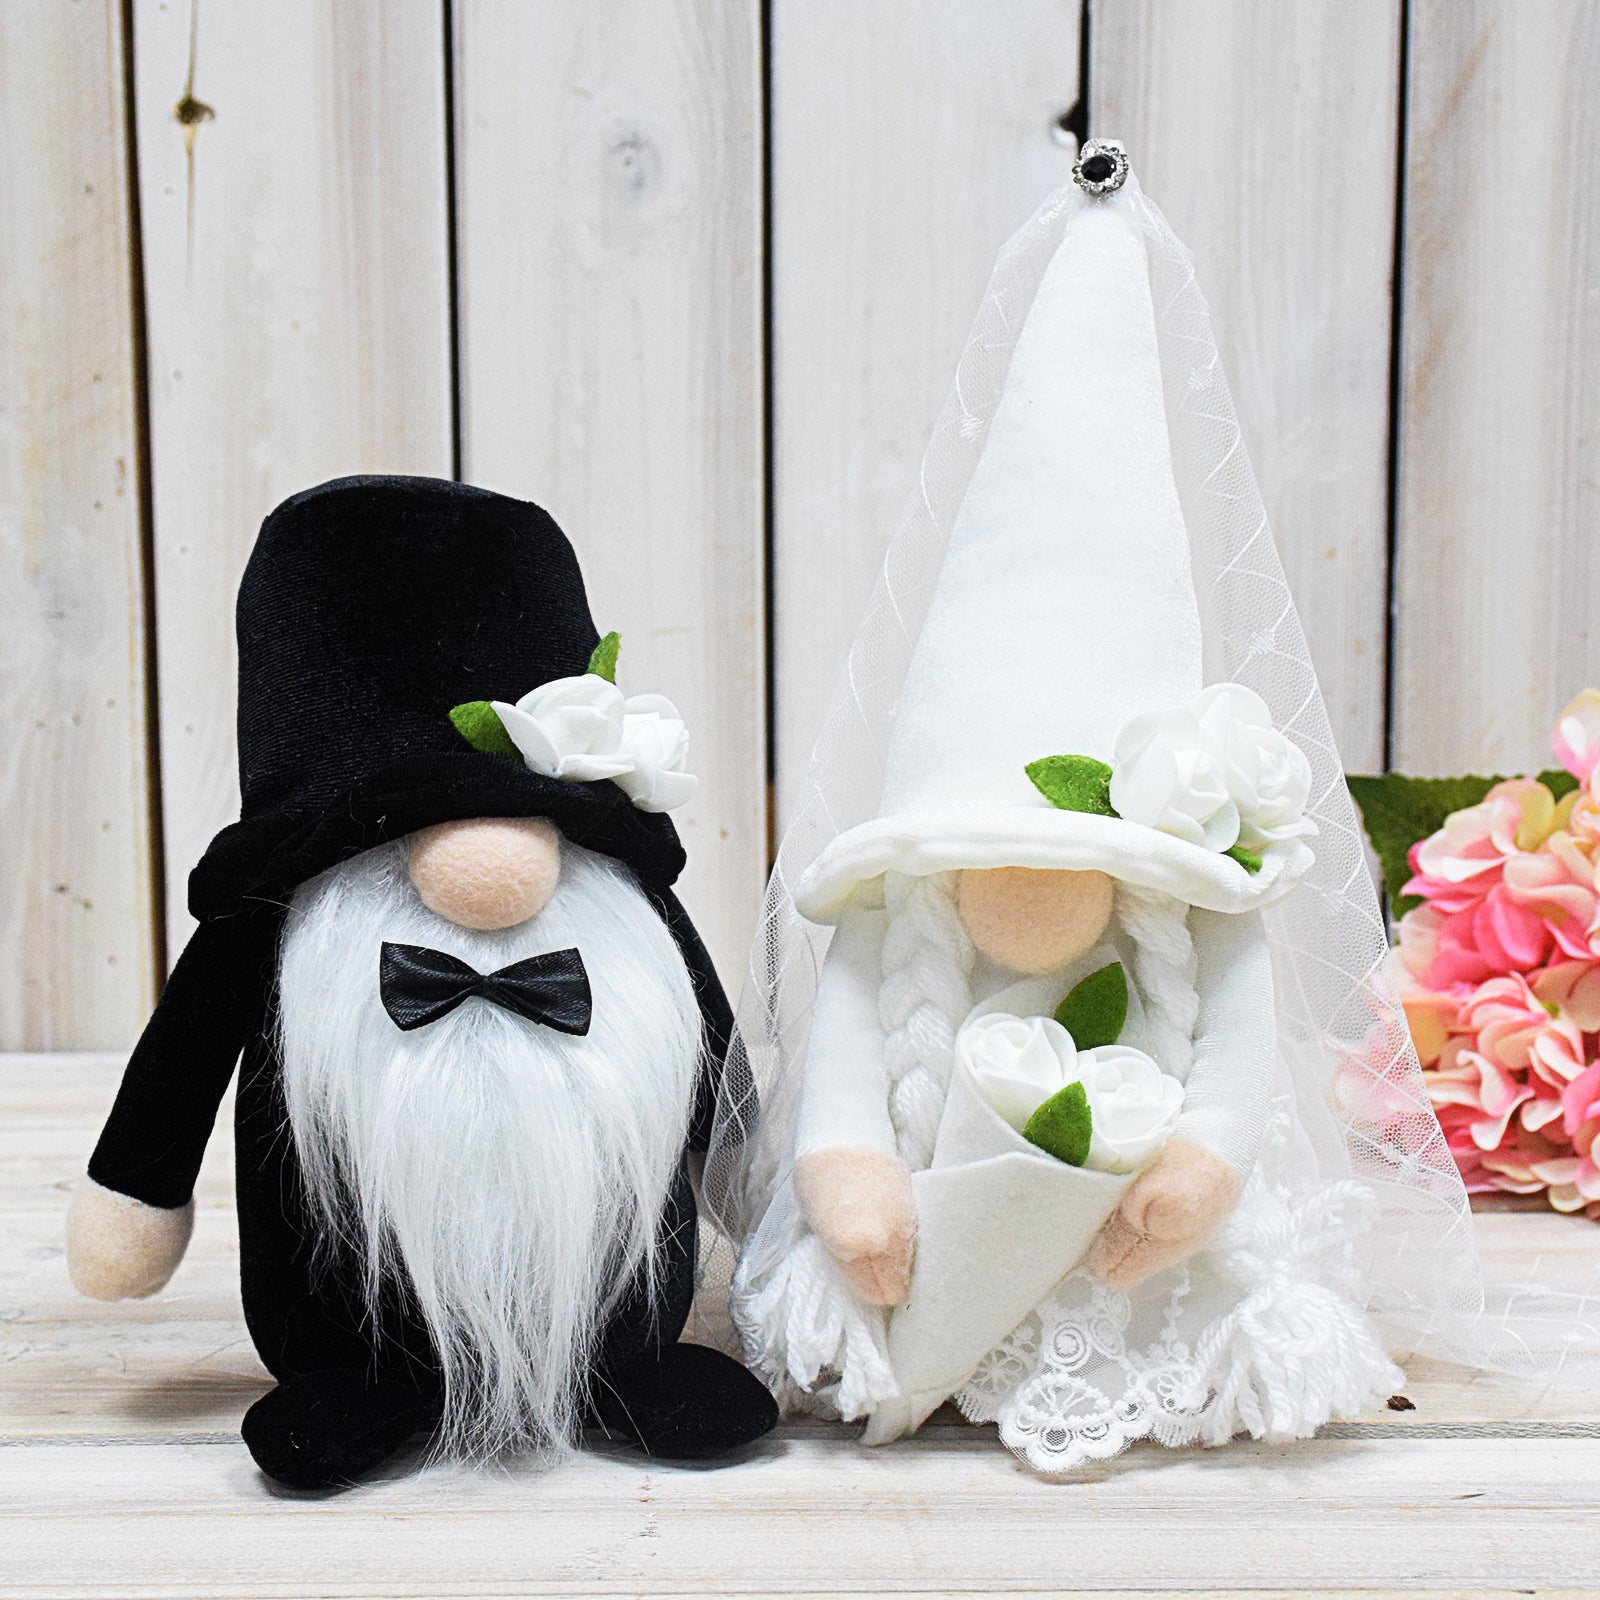 Faceless Doll Wedding Decoration Supplies Doll Ornaments